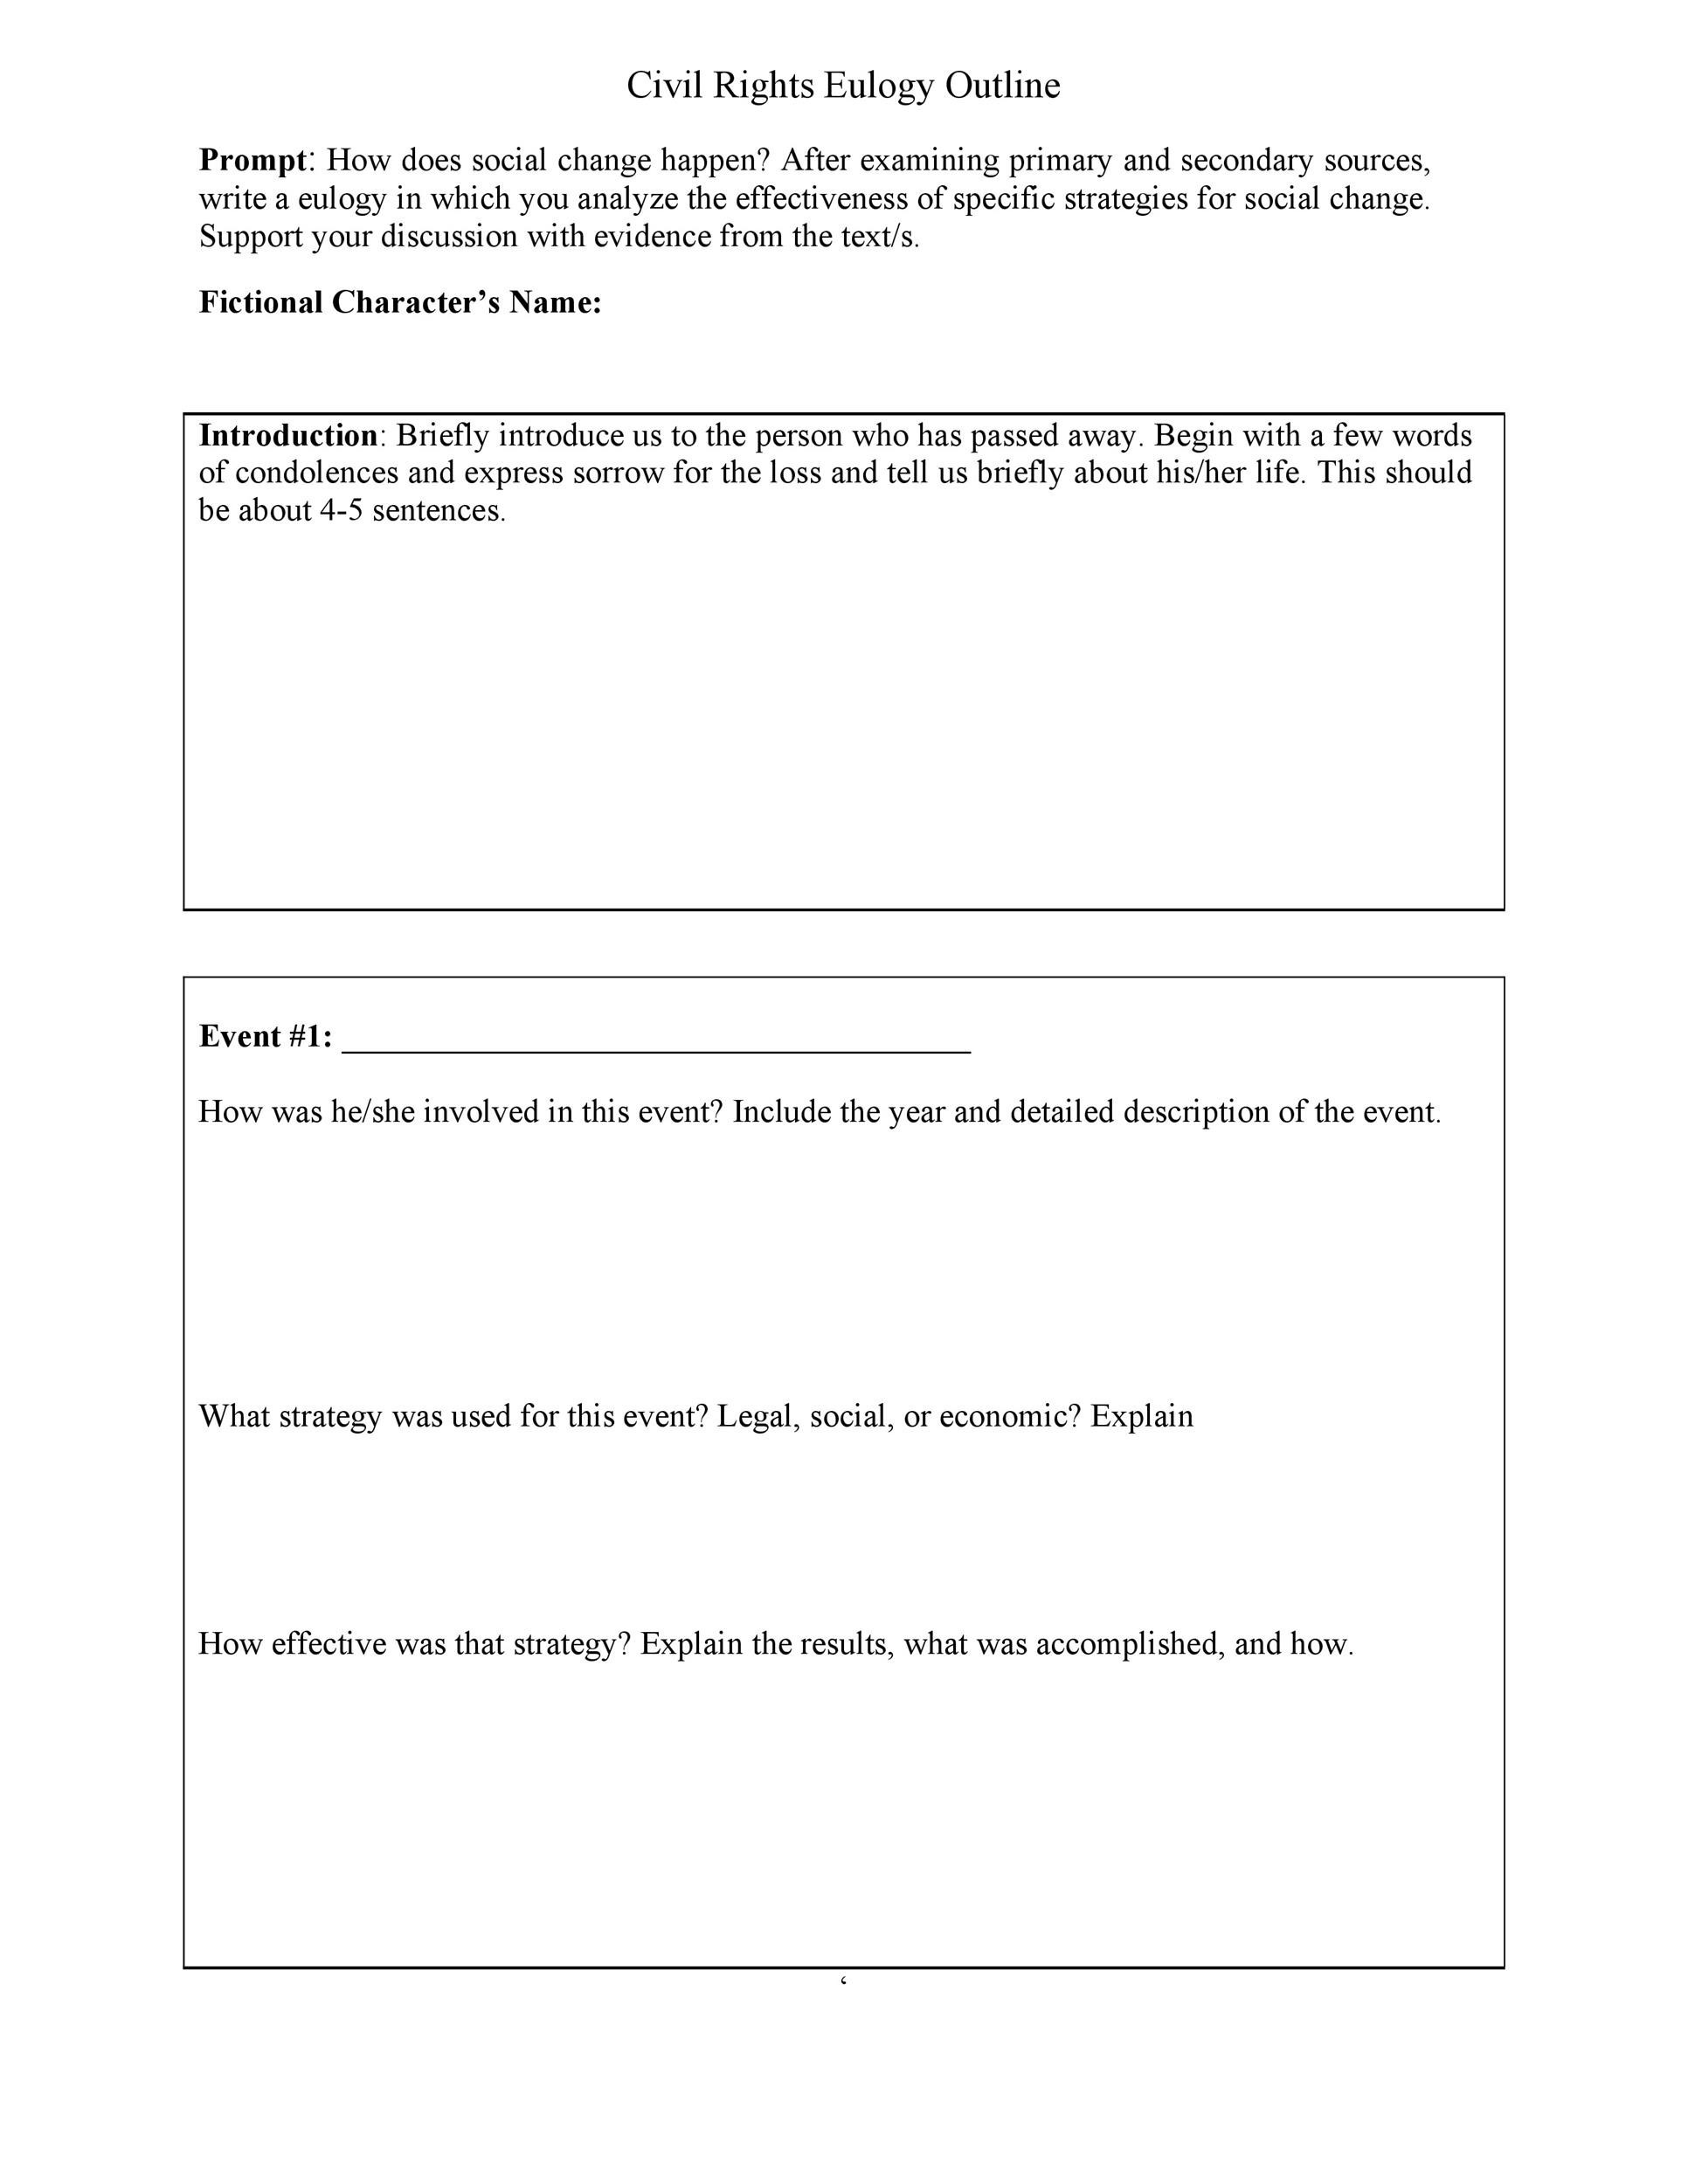 50 Best Eulogy Templates (For Relatives or Friends) ᐅ TemplateLab